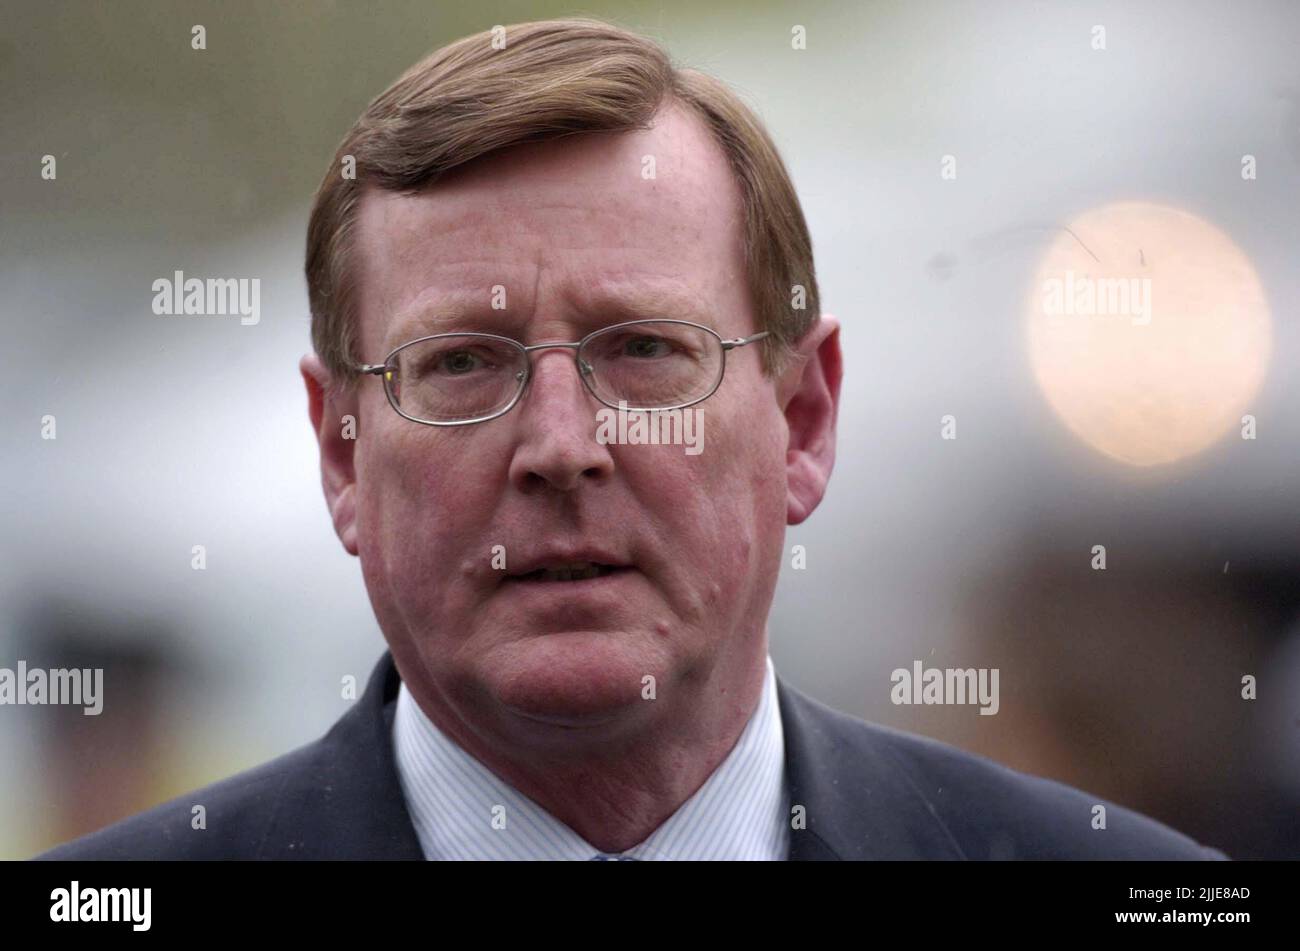 File photo dated 6/5/2005 of Ulster Unionist leader David Trimble arrives at Banbridge polling station where he lost his seat. The Former Northern Ireland first minister has died, the Ulster Unionist Party has announced. Issue date: Monday July 25, 2022. Stock Photo